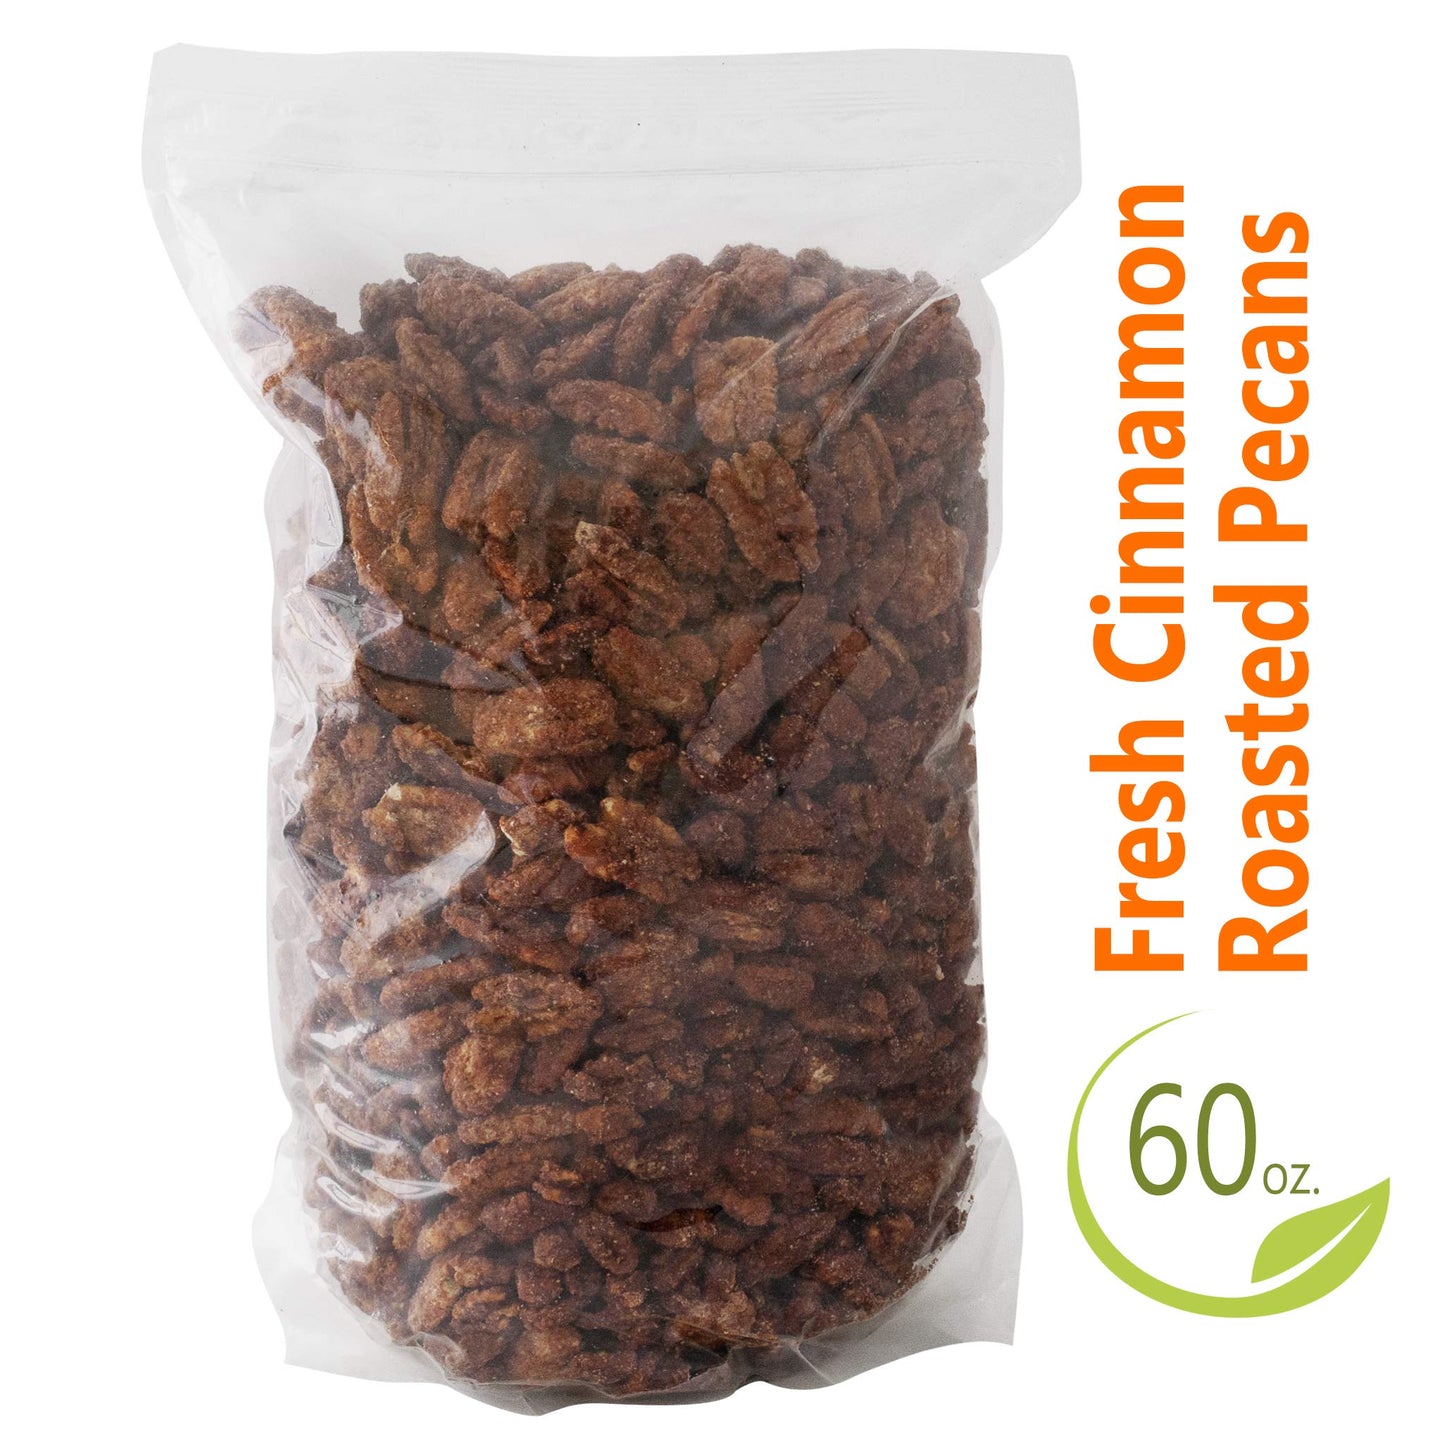 Gourmet Cinnamon Roasted Pecans 24 oz (1.75 lb) Bag: Addictive Snack/Treat to Satisfy Your Sweet Tooth | Artisan Hand-Roasted Nuts Fresh to Order by Pop’N Nuts